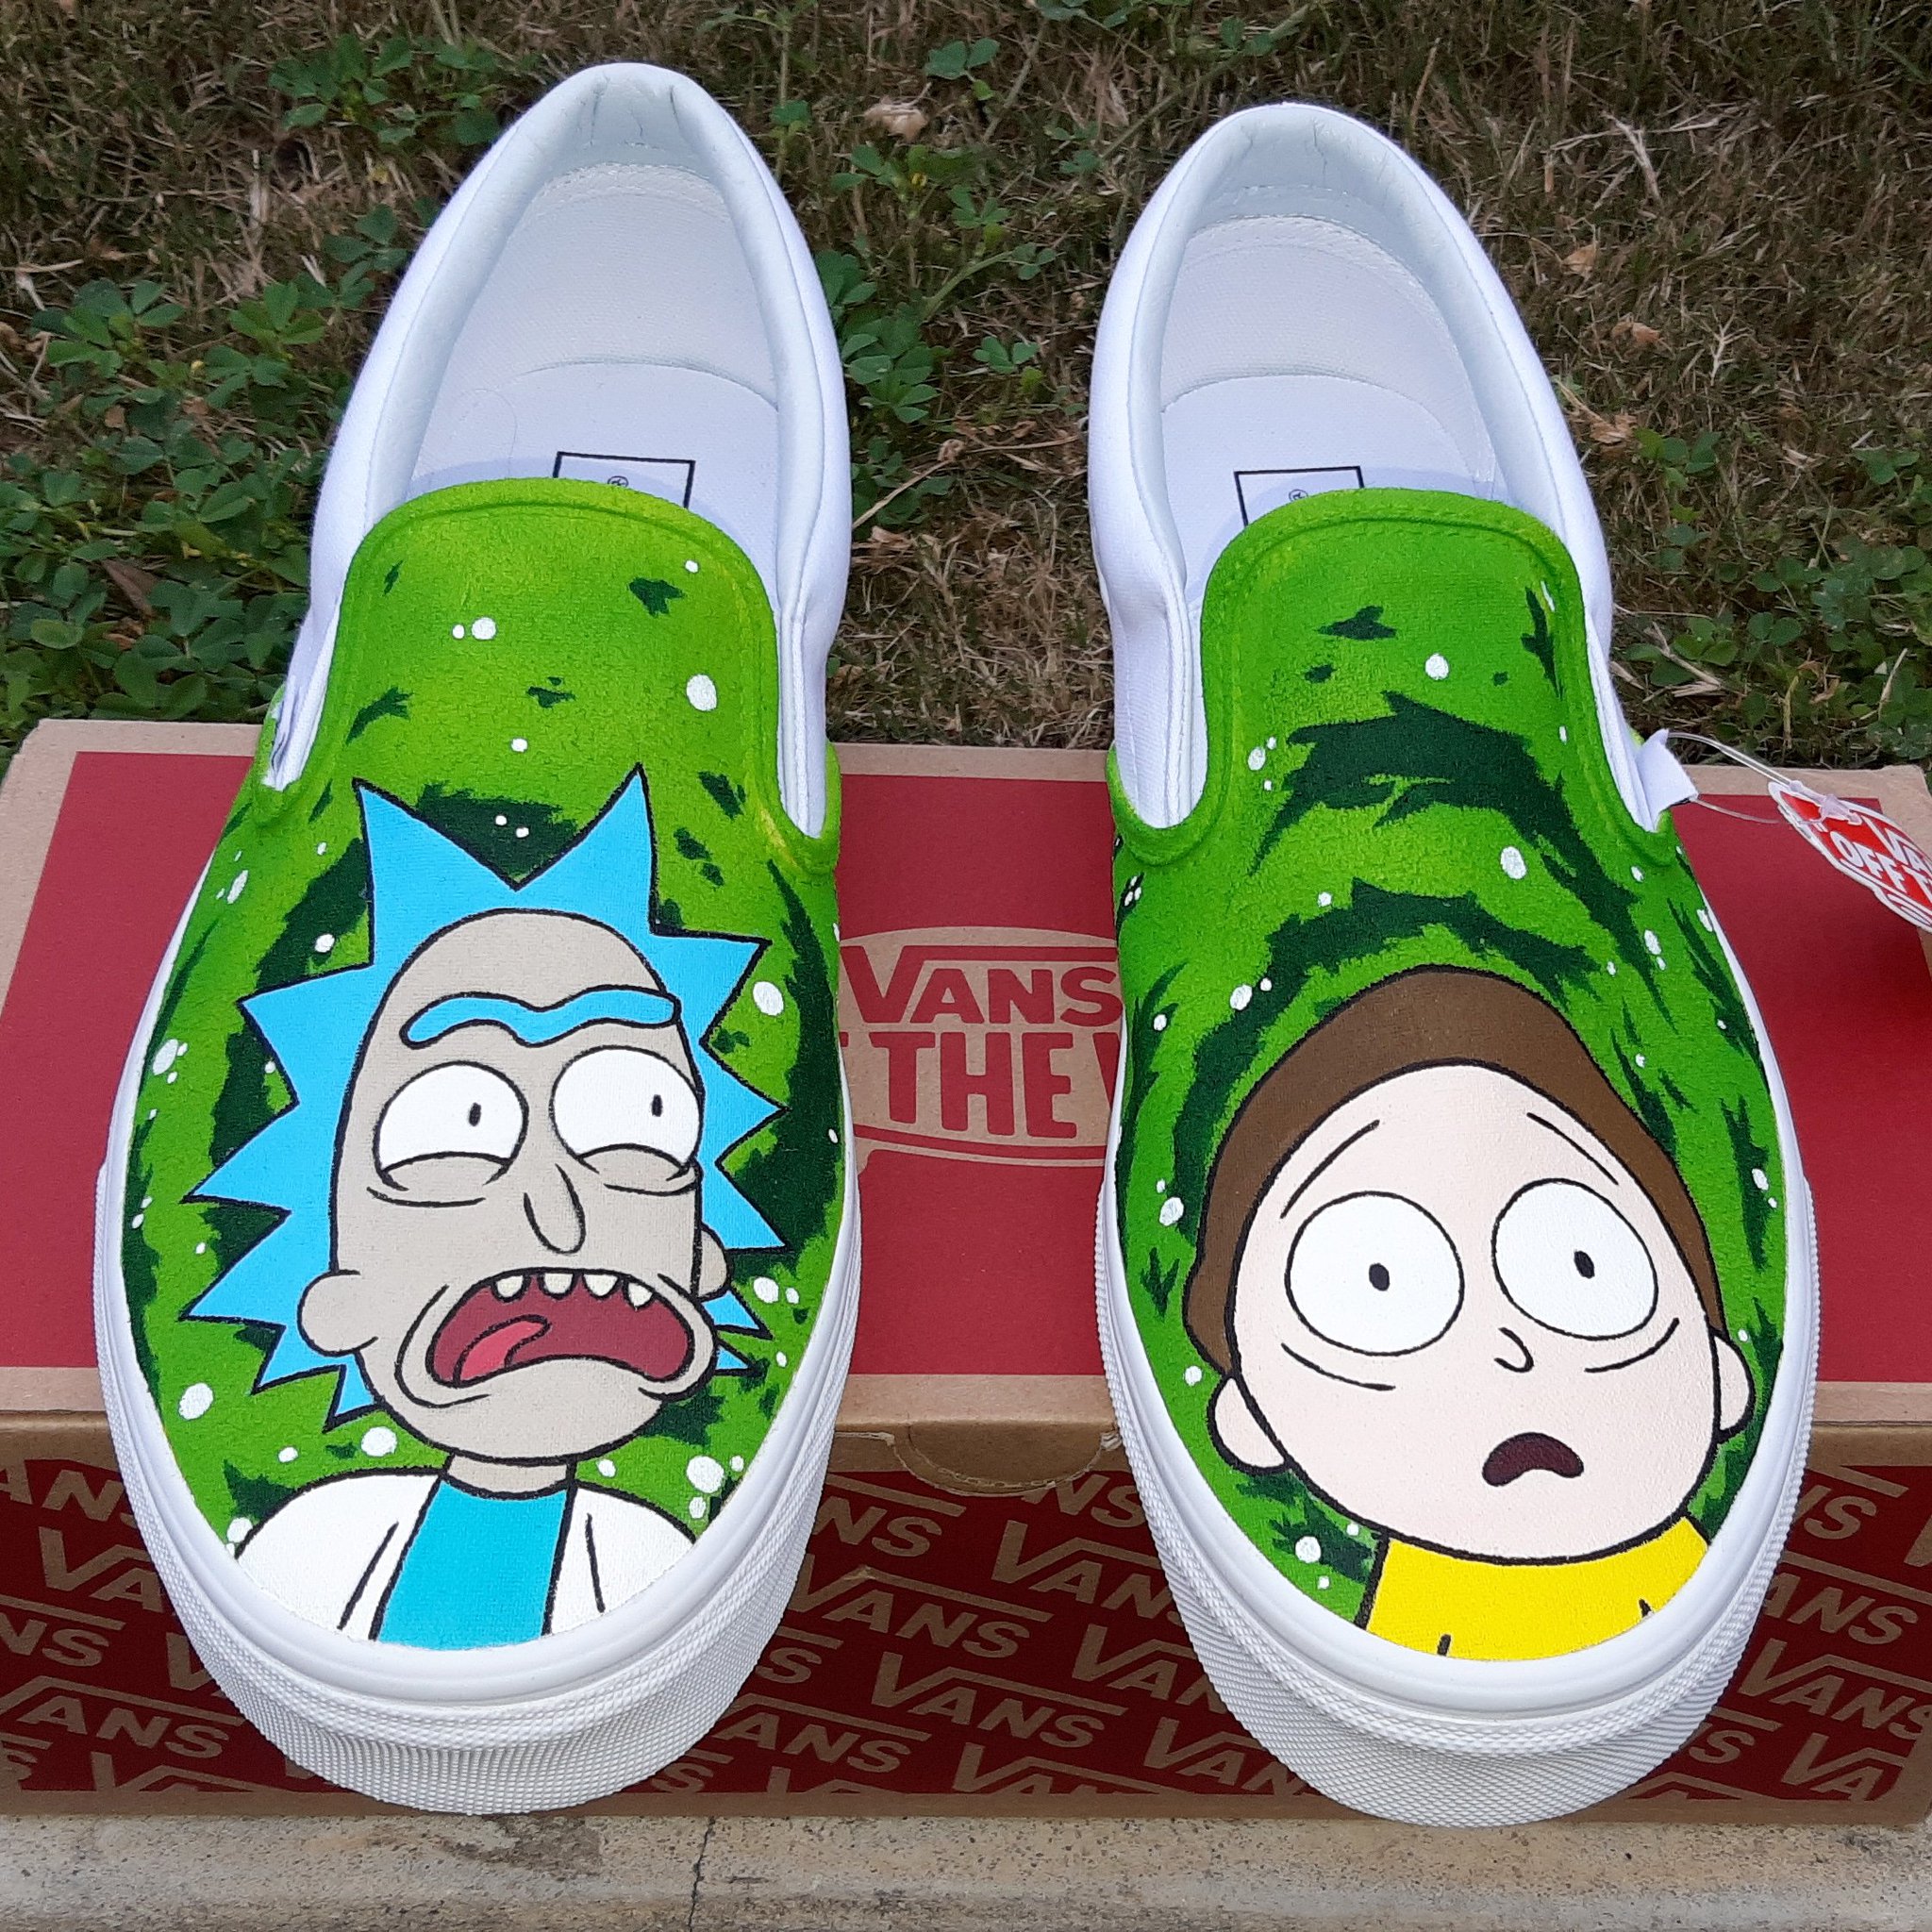 J3_Customs on Twitter: "Rick and Morty Custom Vans Done with @AngelusDirect  products #letsgetshwifty #RickandMorty #vans #Angelusdirect @VANS_66  @RickandMorty https://t.co/e1gtzZVj0p" / Twitter